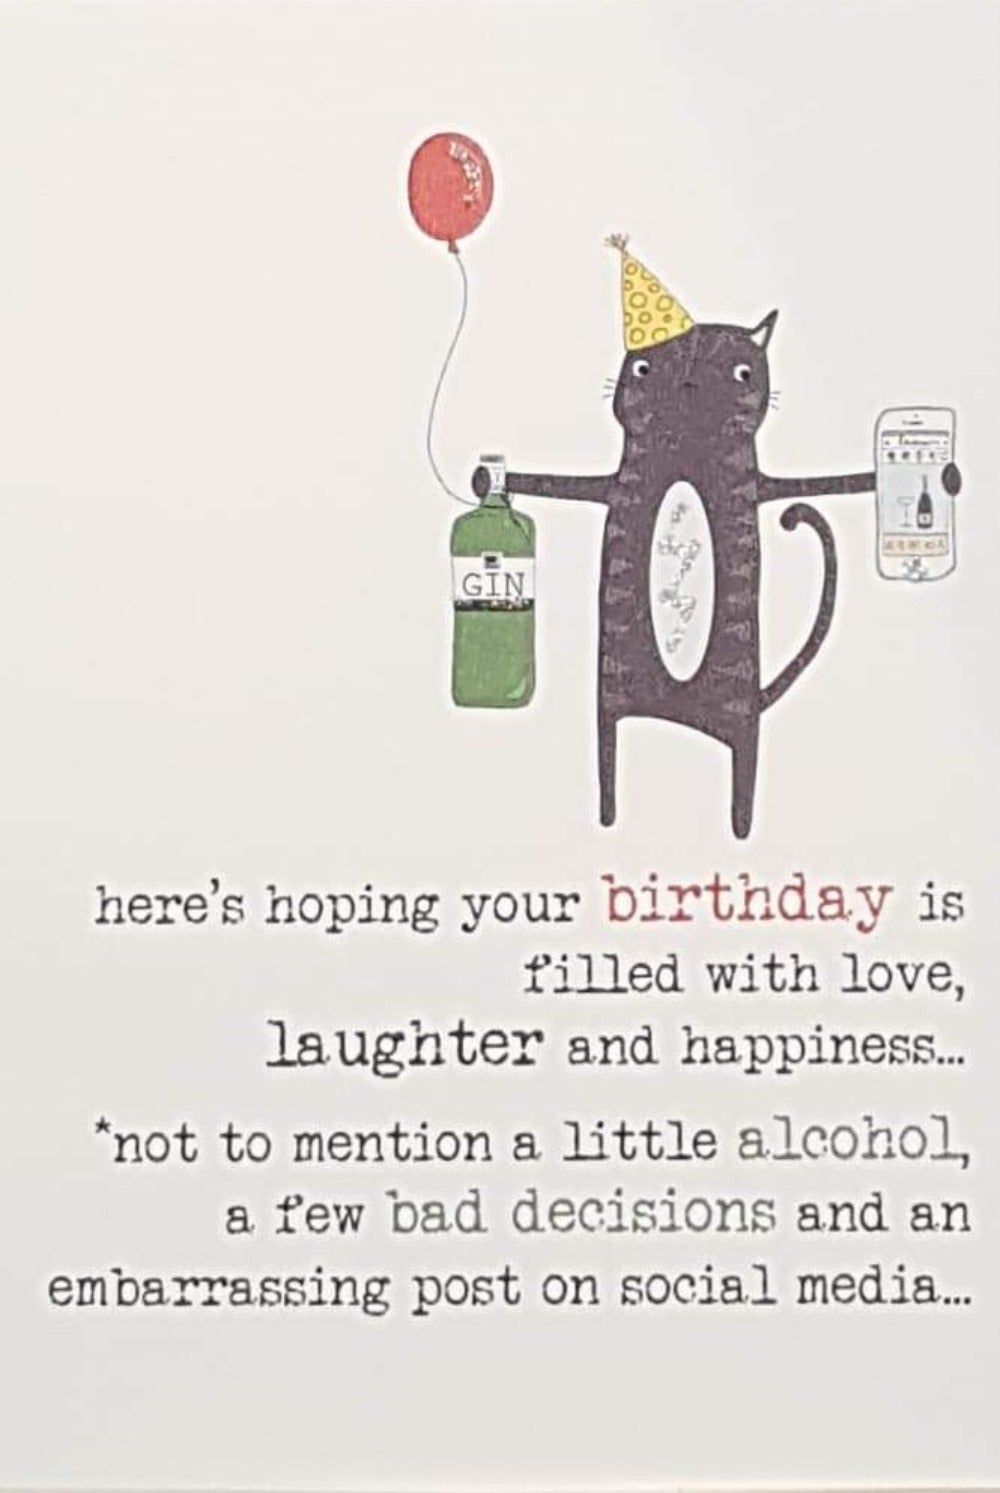 Birthday Card - General / A Cat In Yellow A Party Hat  Holding A Red Balloon And A Bottle Of Gin